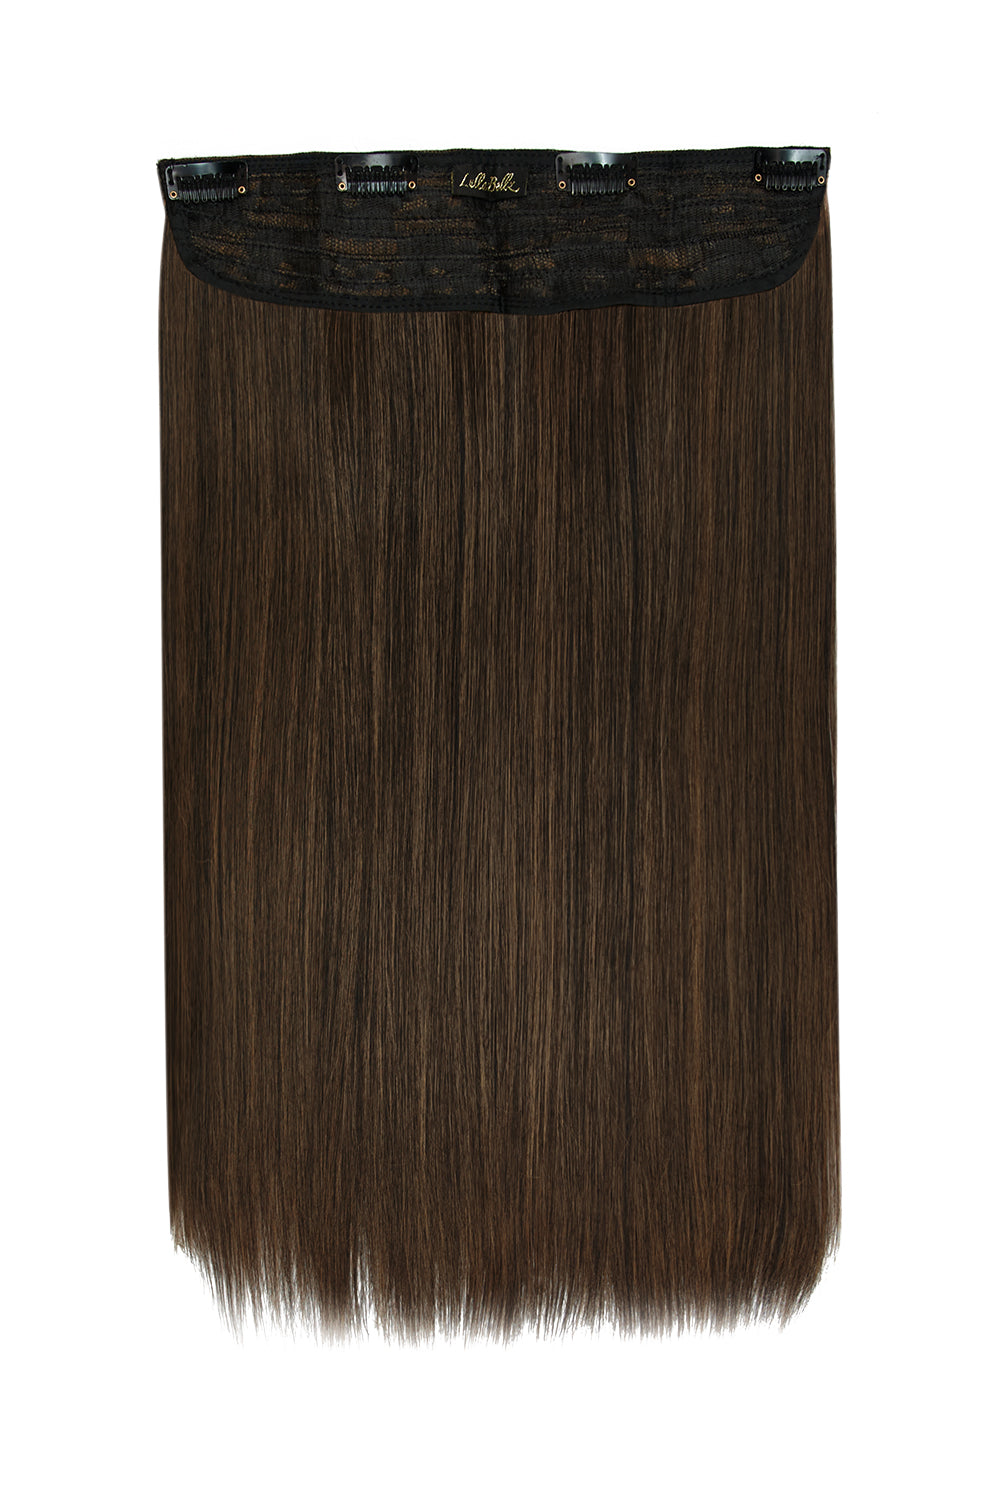 Thick 18" 1 Piece Straight Synthetic Clip In Hair Extensions - LullaBellz  - Dark Brown & Caramel